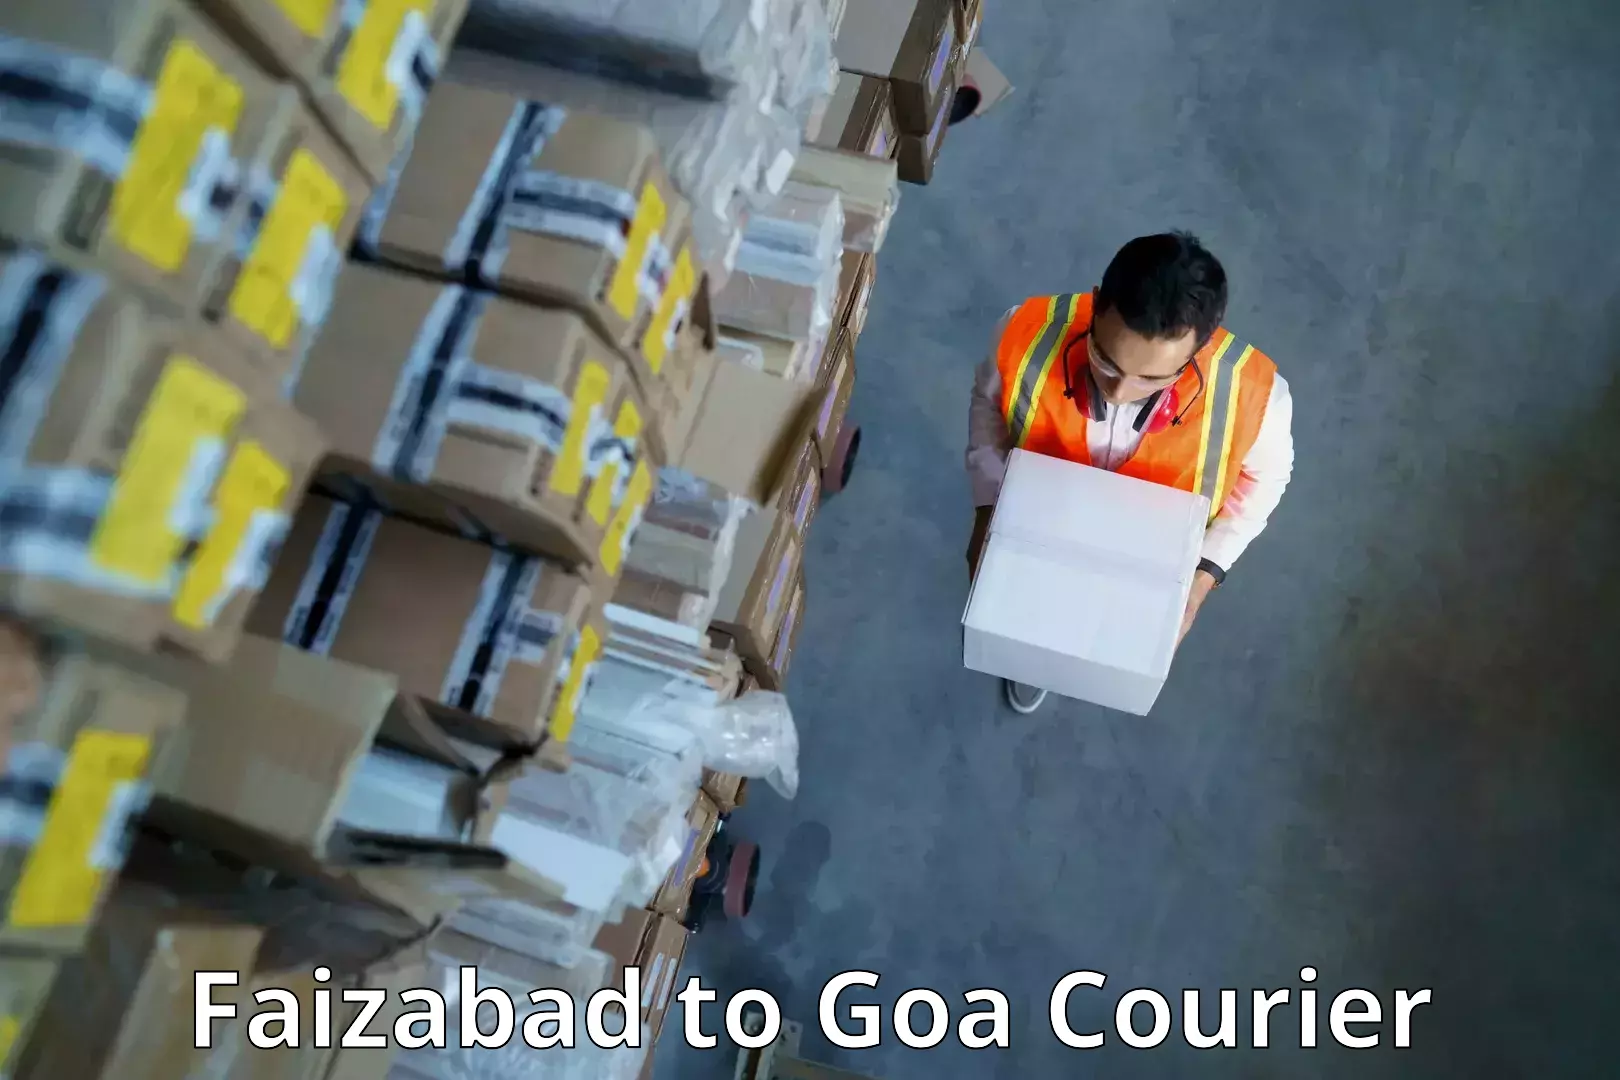 State-of-the-art courier technology Faizabad to Panaji